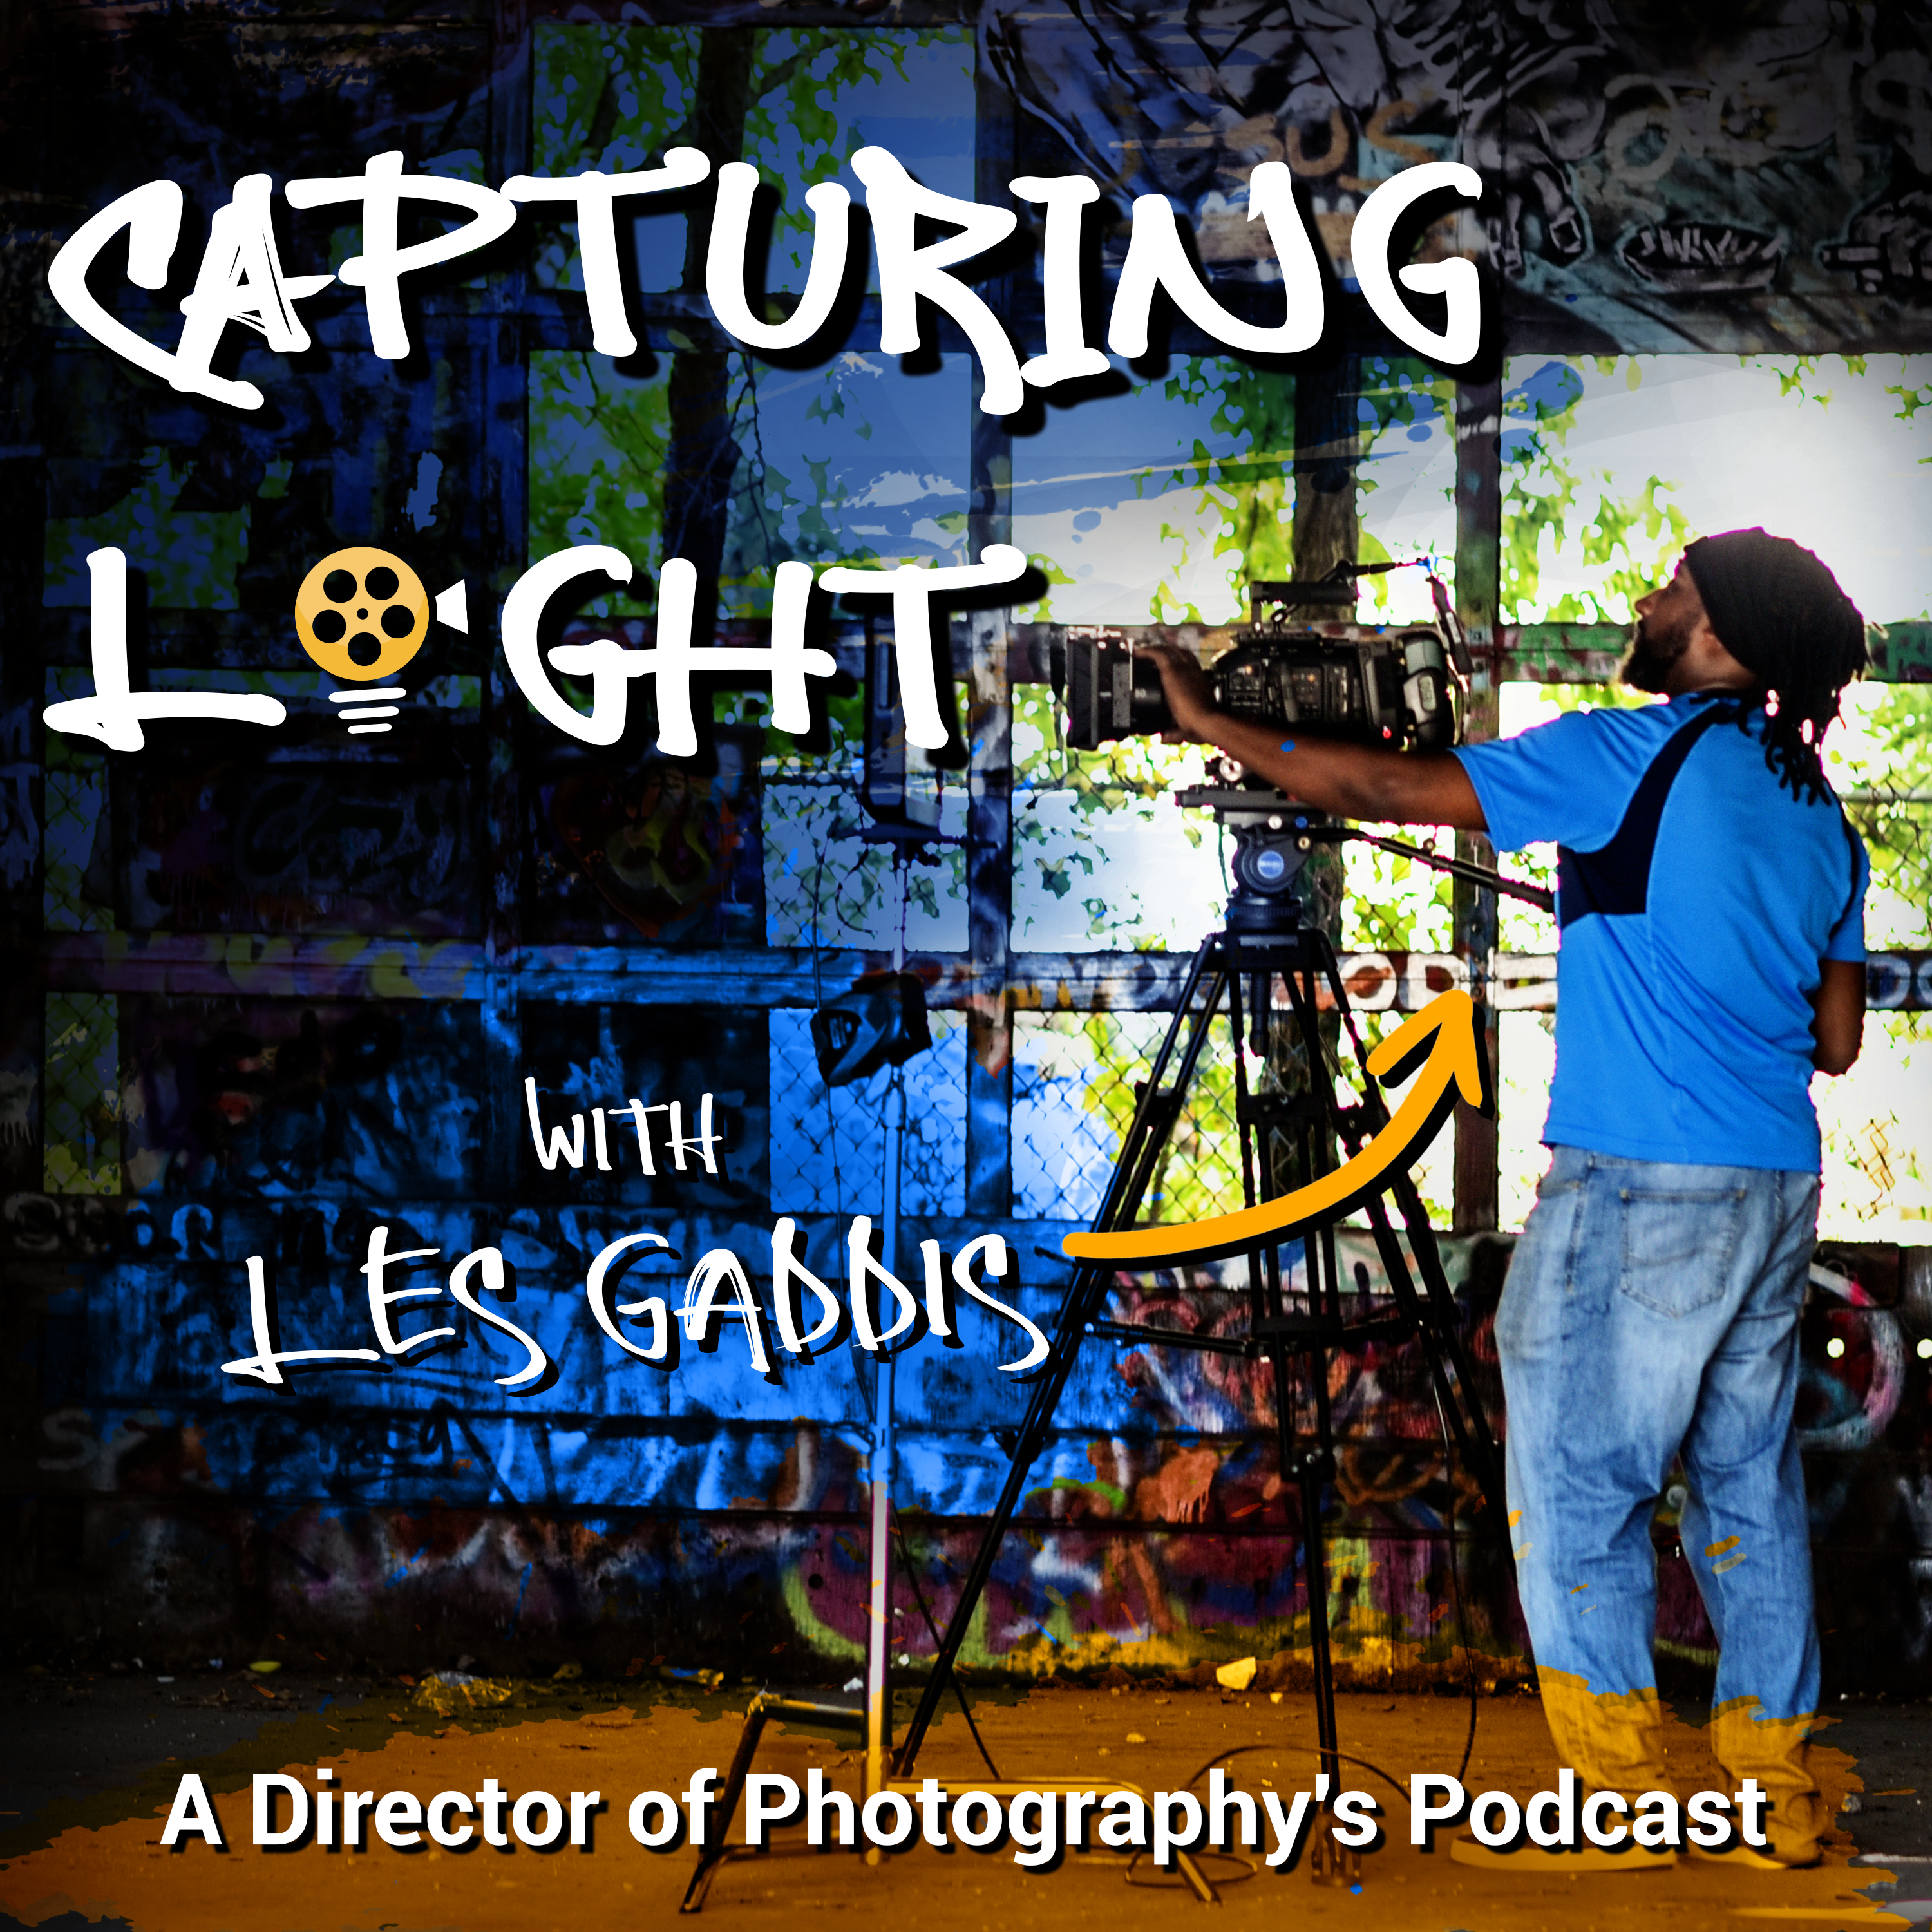 Capturing Light - A Director of Photography's Podcast